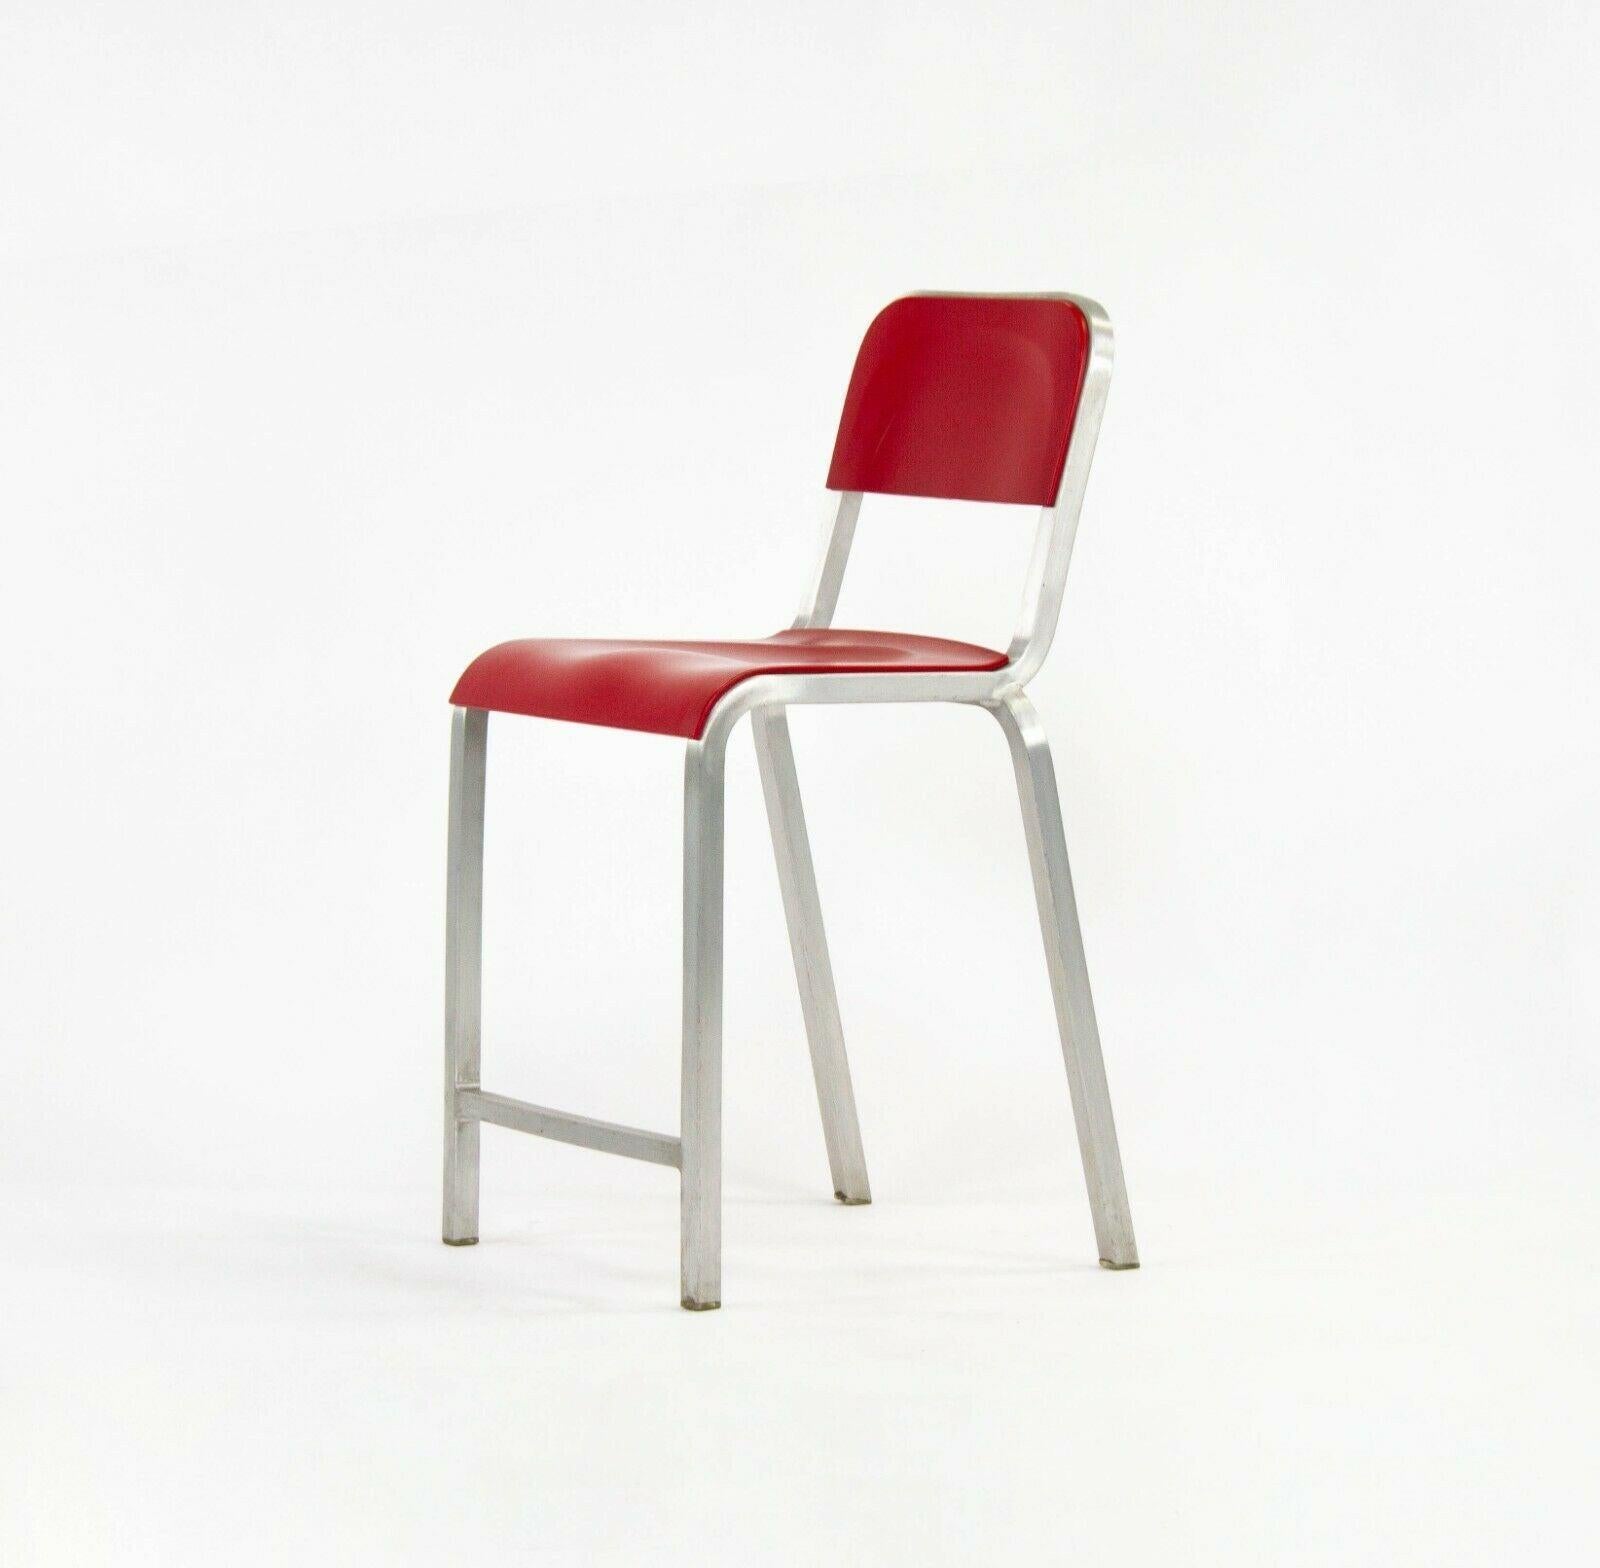 2010s Emeco 1951 Red Counter Stool by Adrian van Hooydonk and BMW Designworks For Sale 2